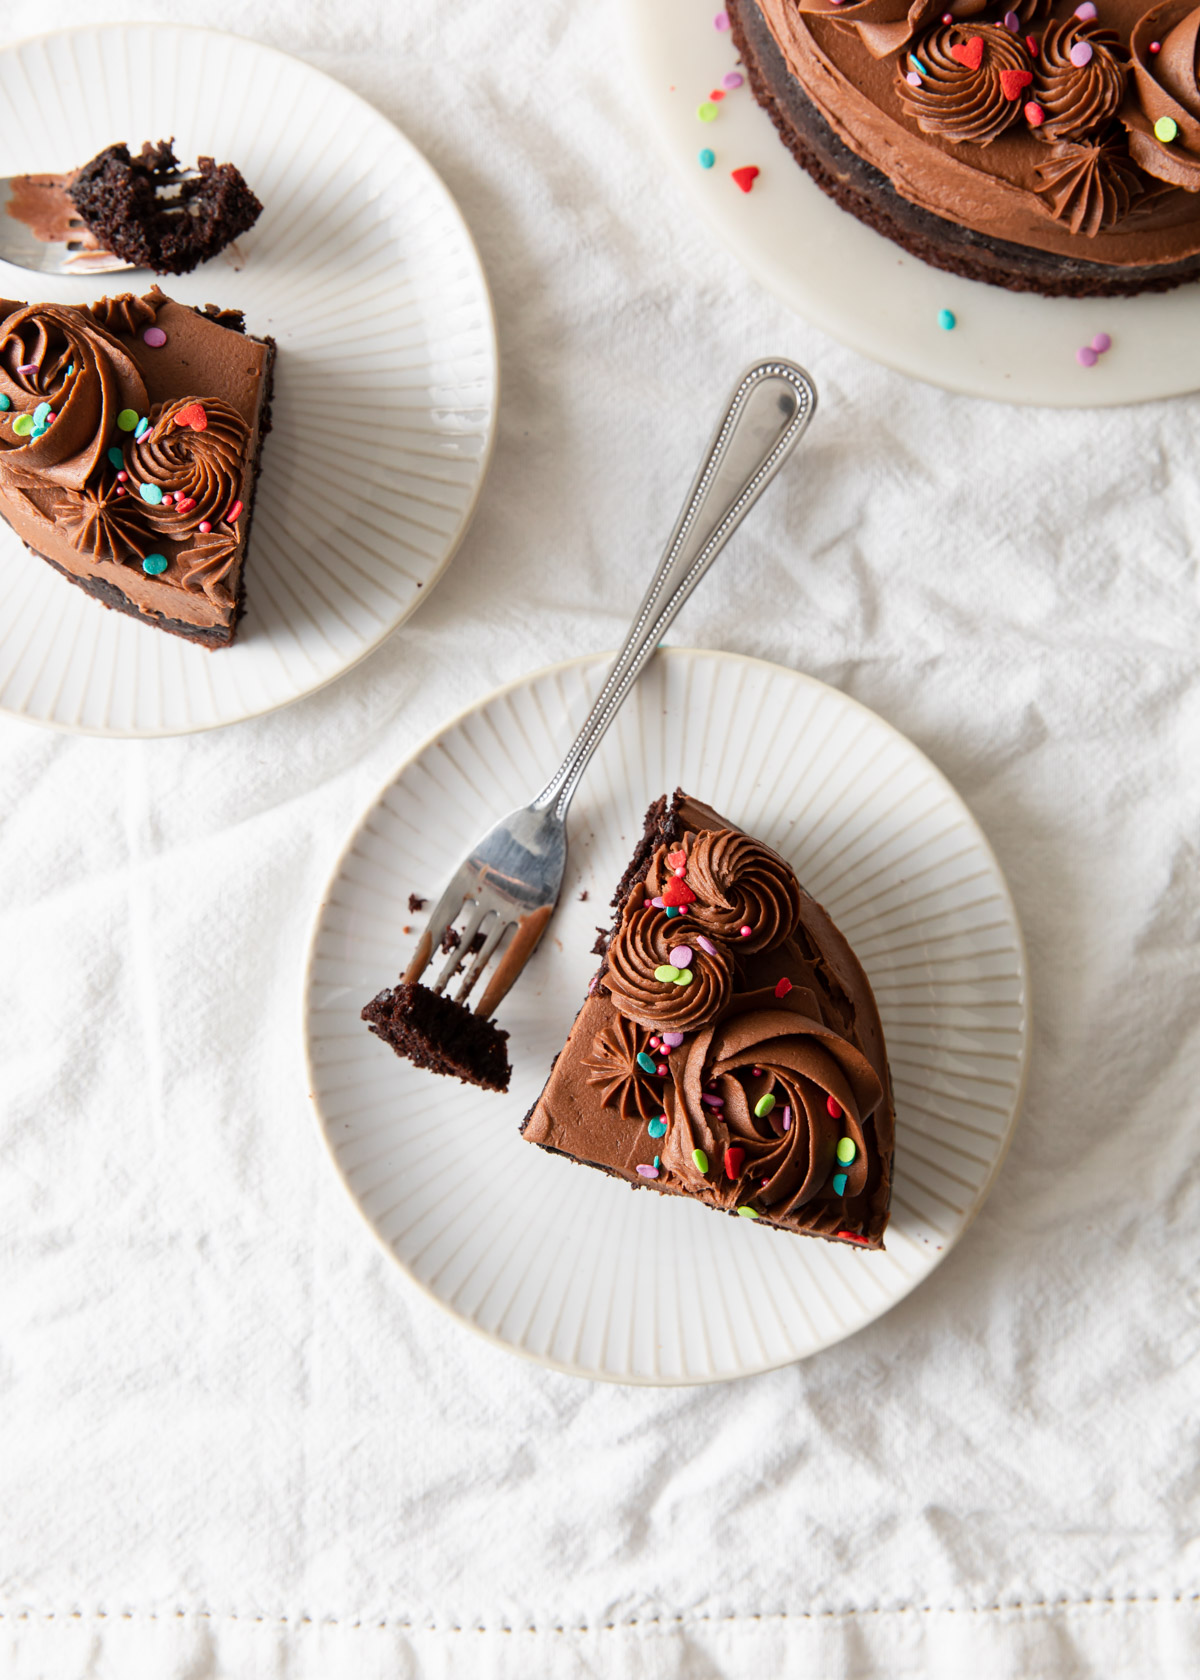 A slice of mini chocolate cake for two with fudge frosting and sprinkles